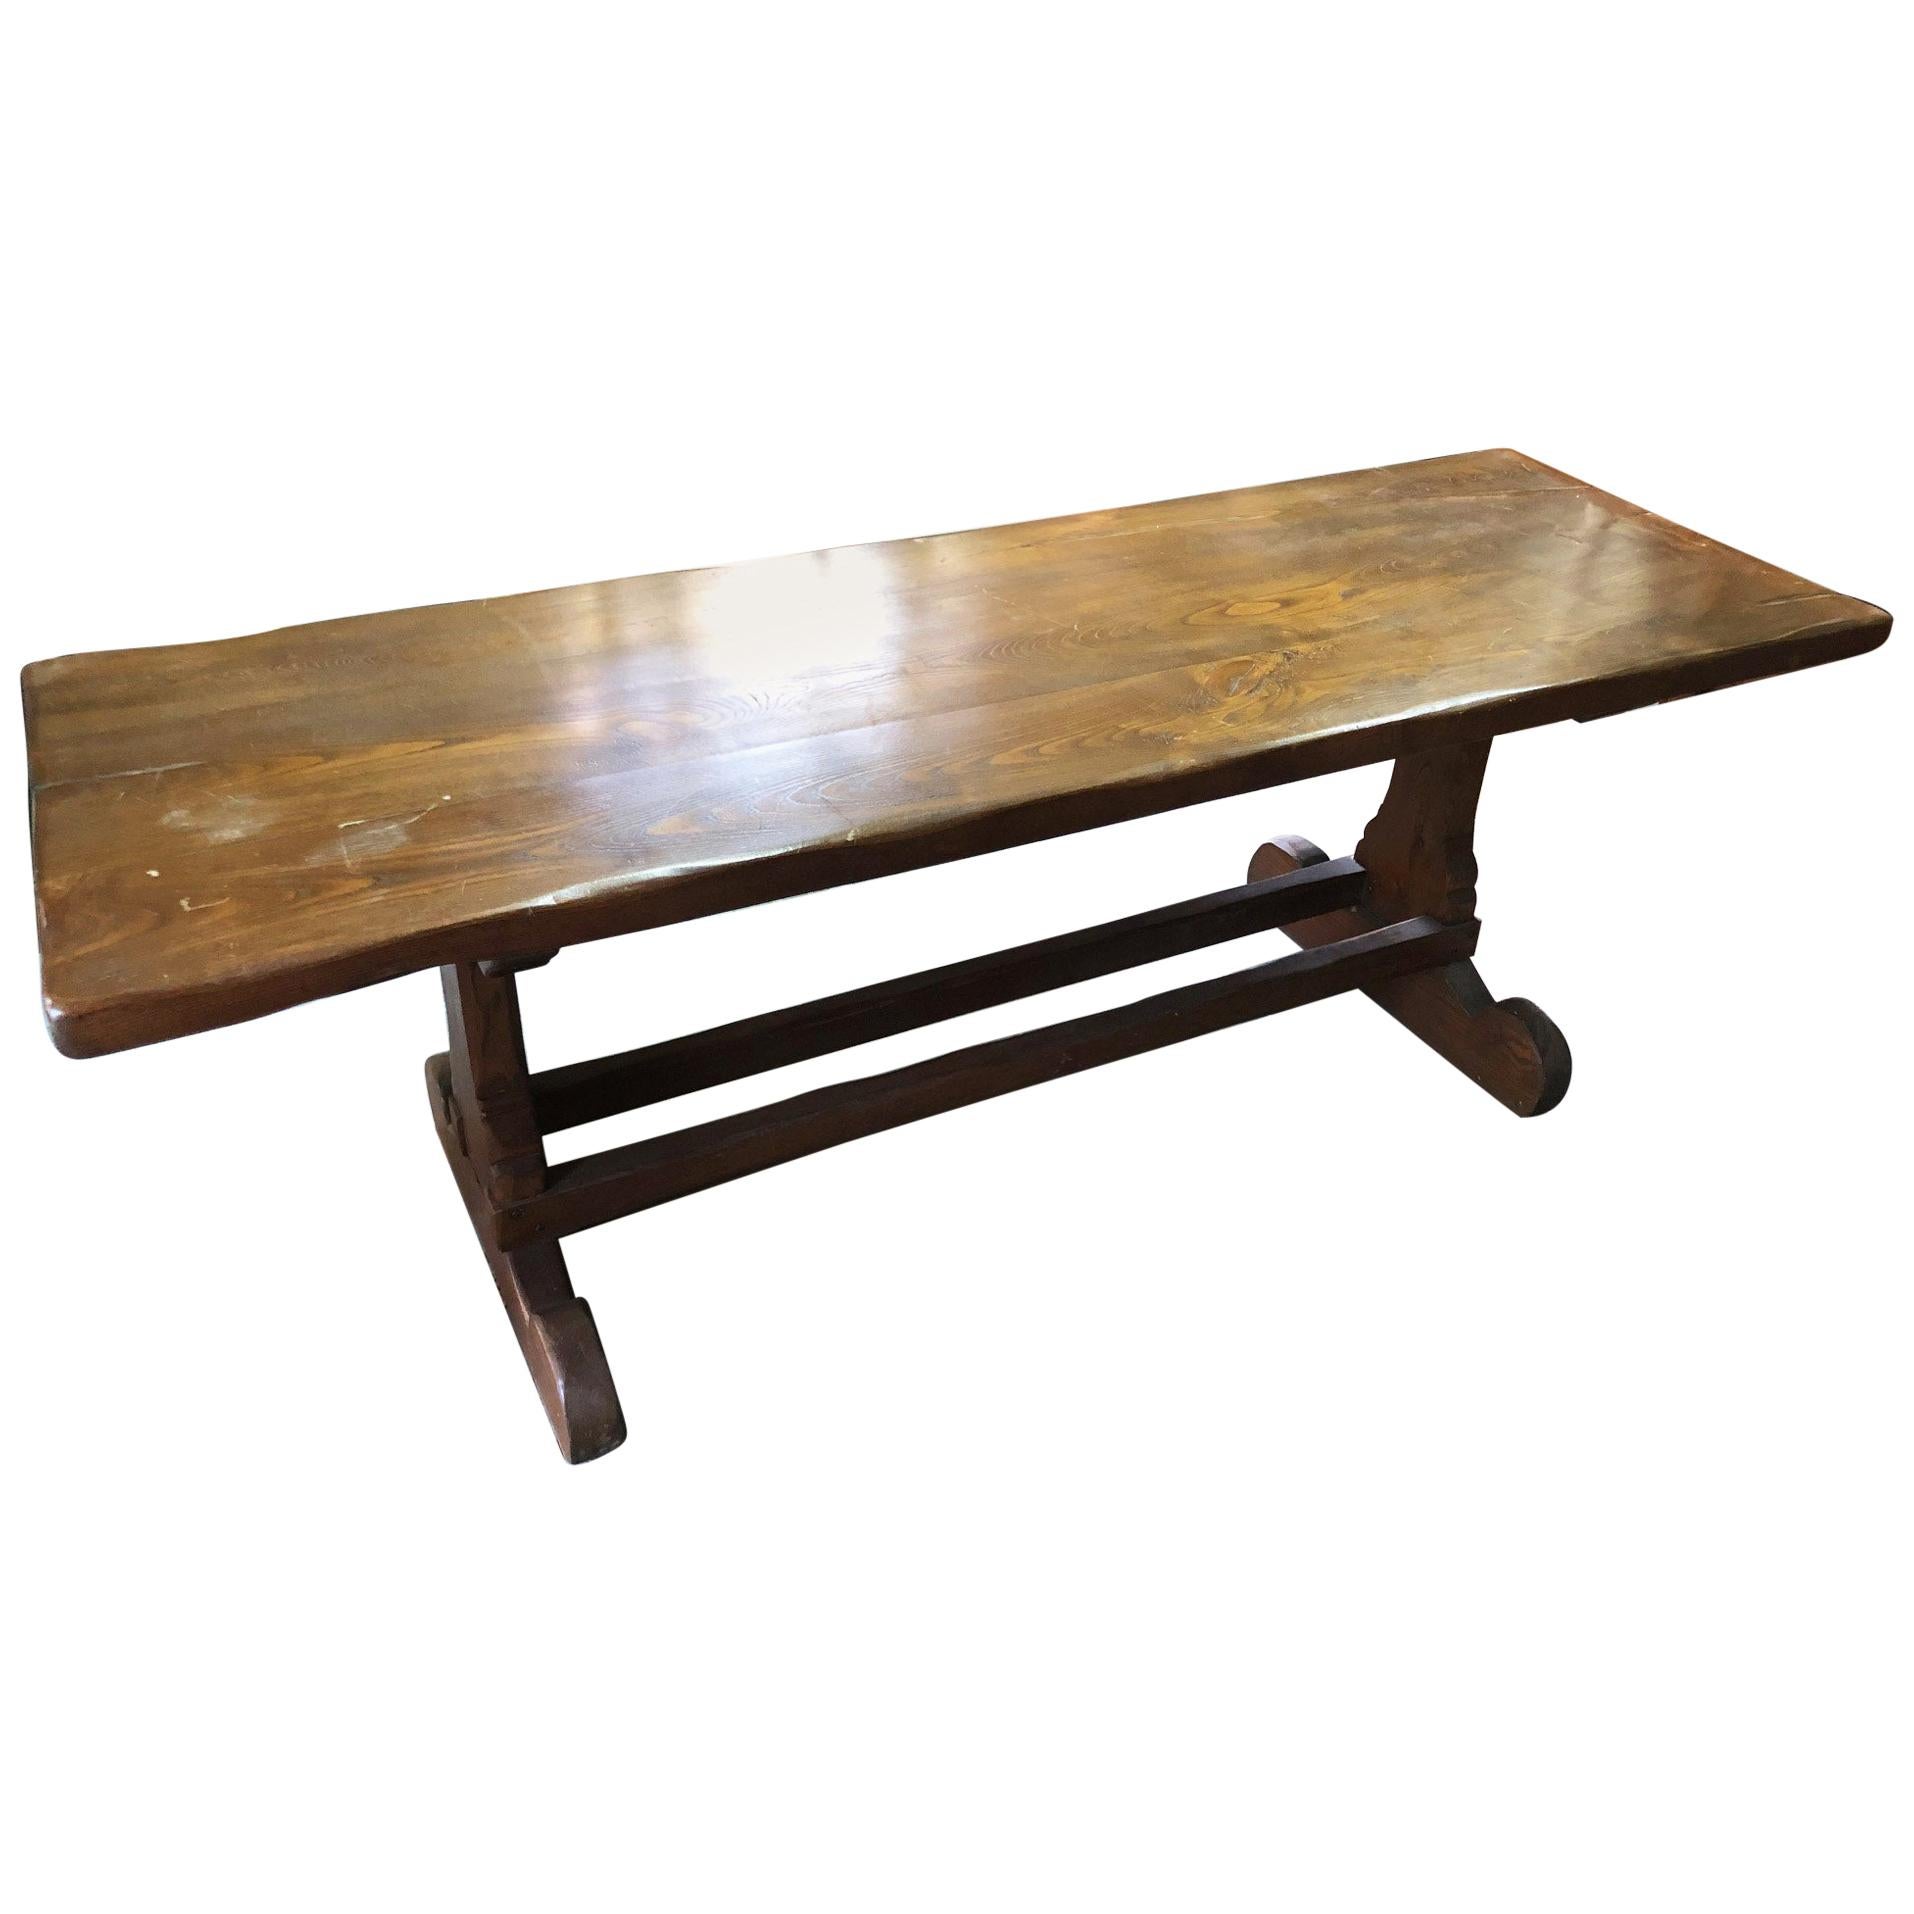 Tuscan Refectory Table in Solid Chestnut Restored Wax Polished, 1940s